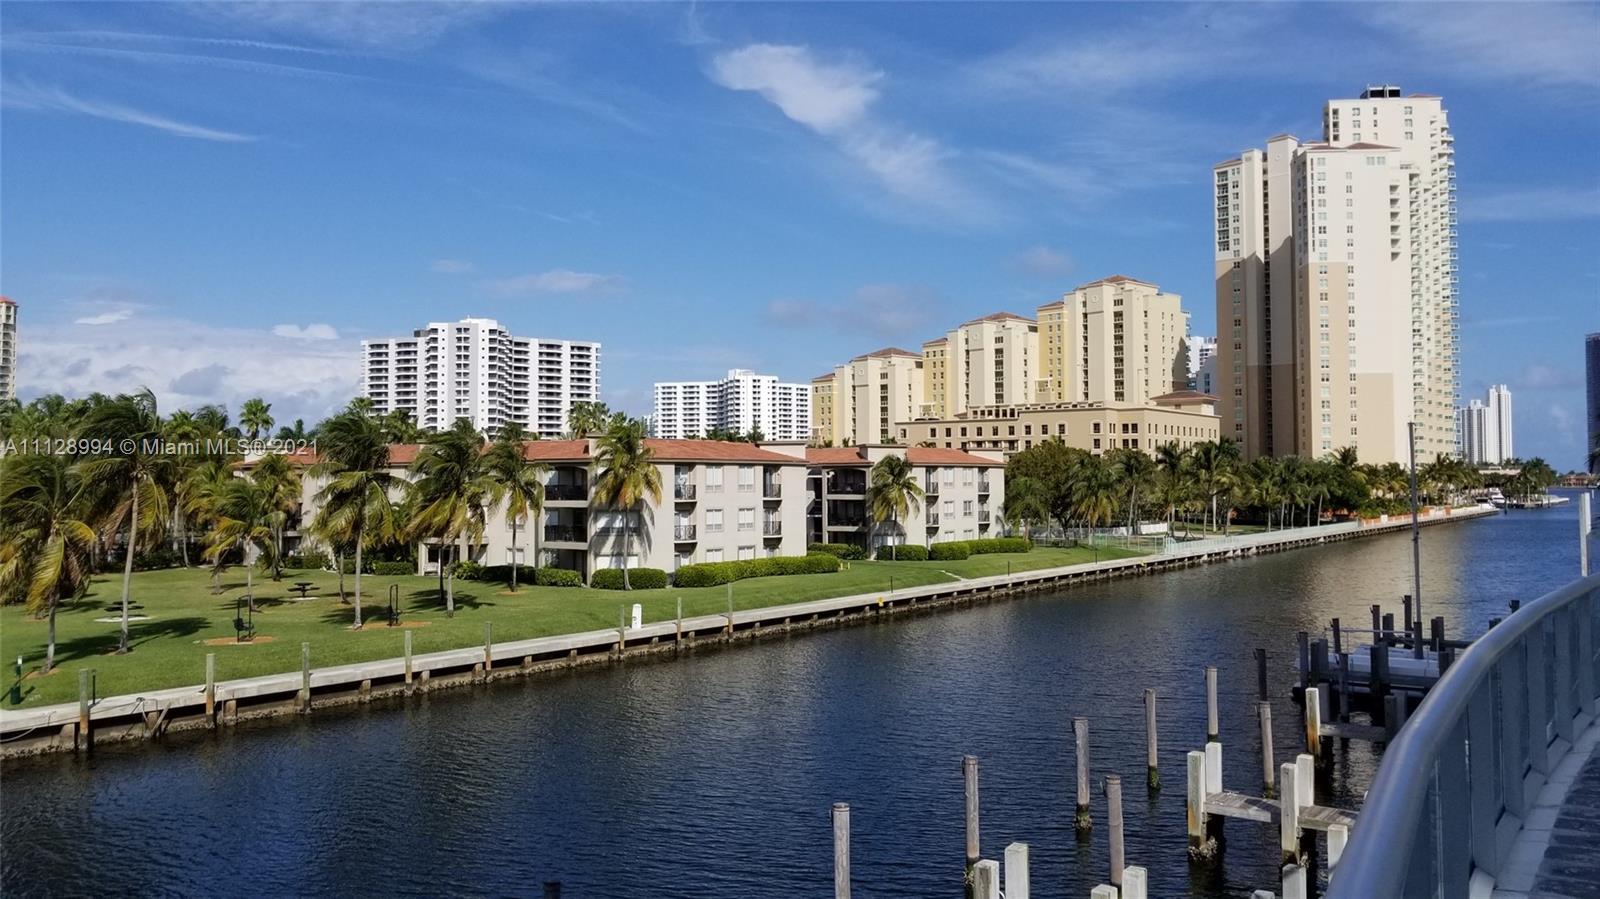 Fantastic unit at The Atrium At Aventura with beautiful views of the canal. This spacious 2 bed/2.5 